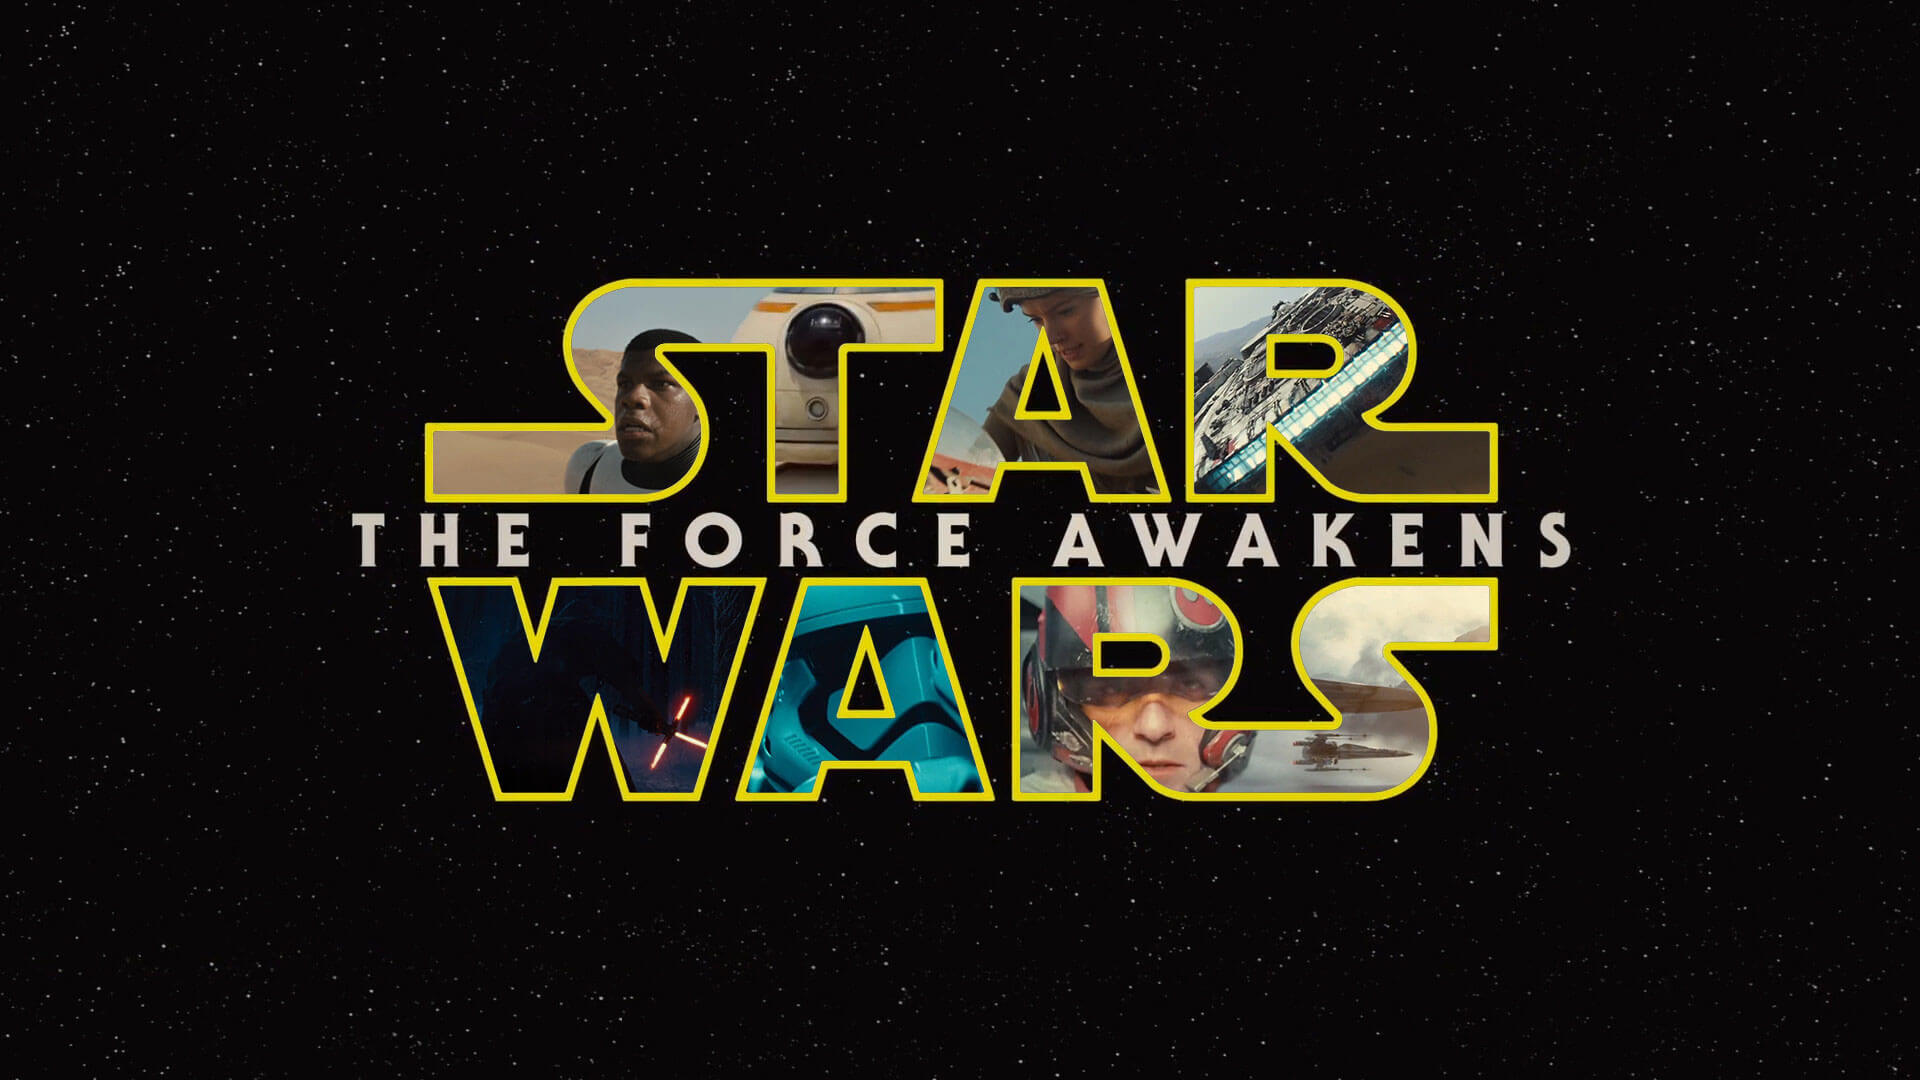 The first new project approached by the company is part of the top 10 changes made to Star Wars by Disney.